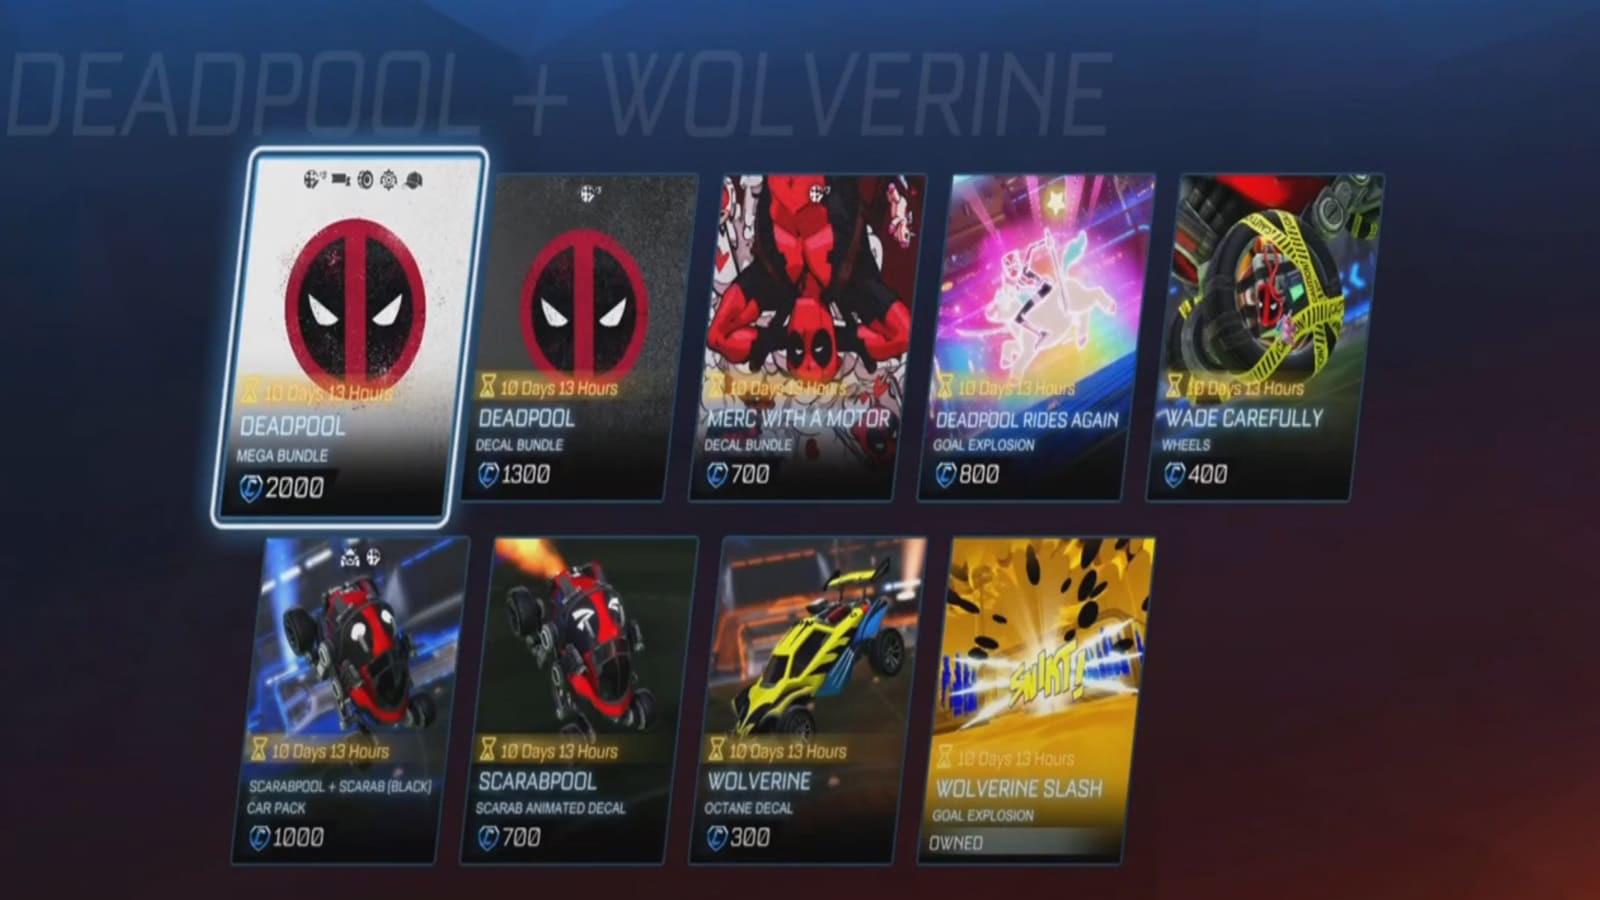 Players can now buy Deadpool and Wolverine bundles in Rocket League. Image credit: Psyonix